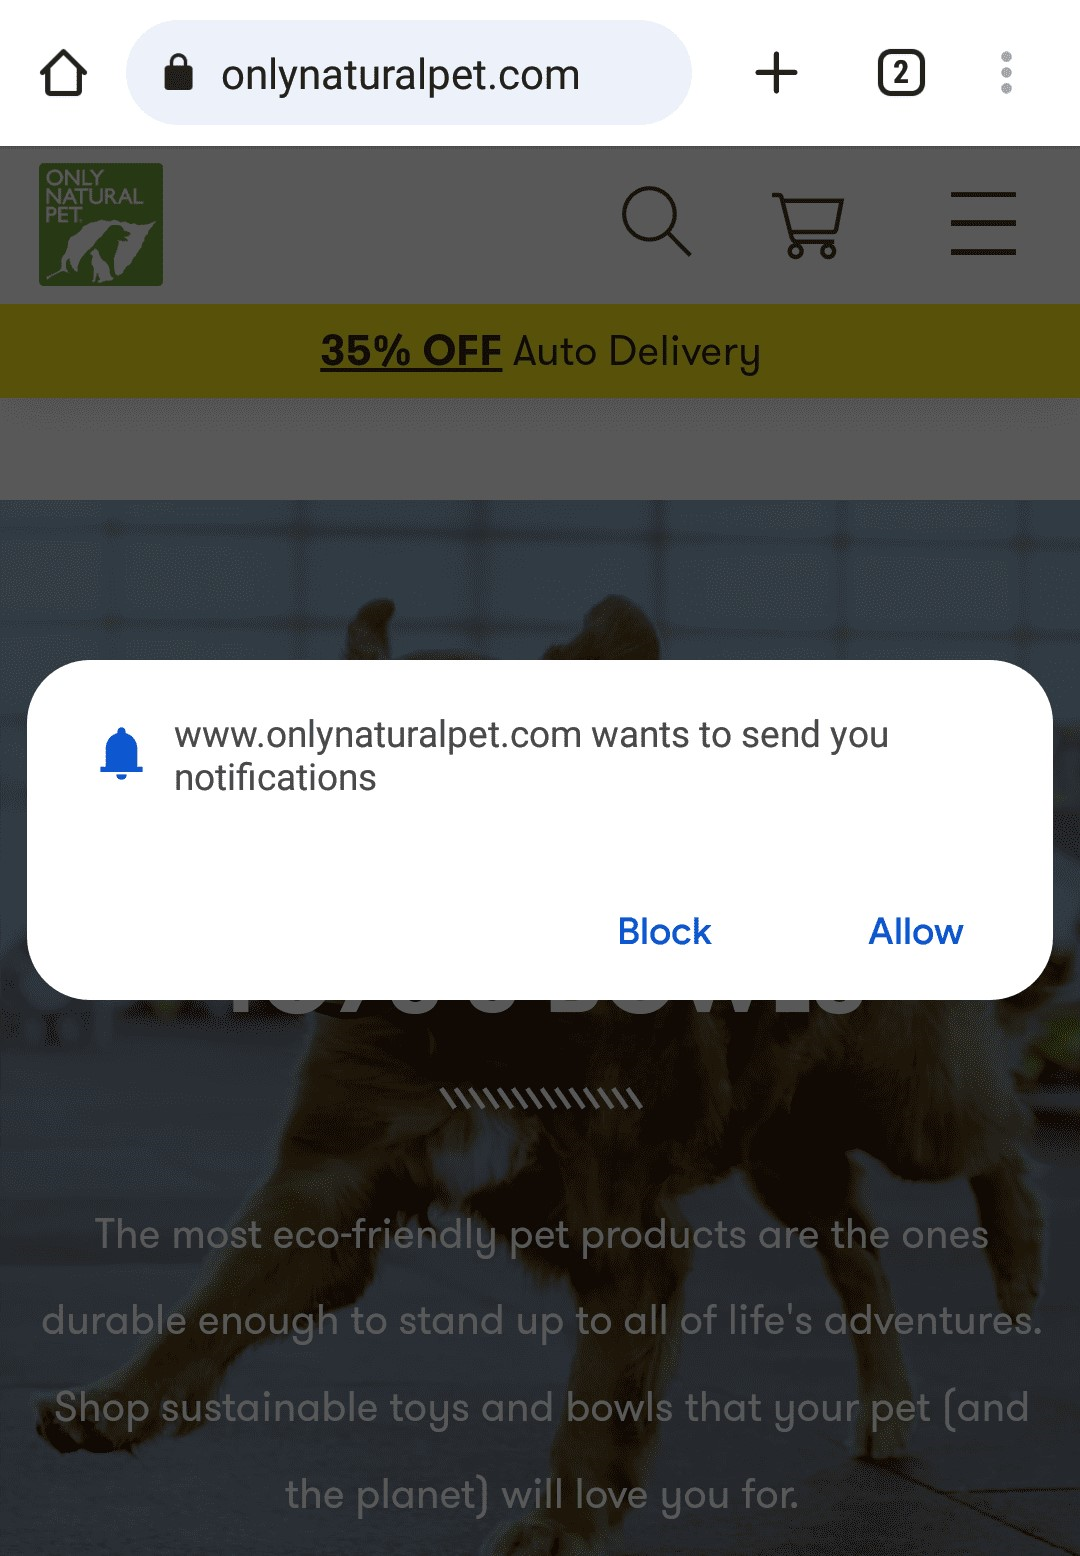 Only Natural Pet's website pop-up asking users if they want to receive the business’s notifications